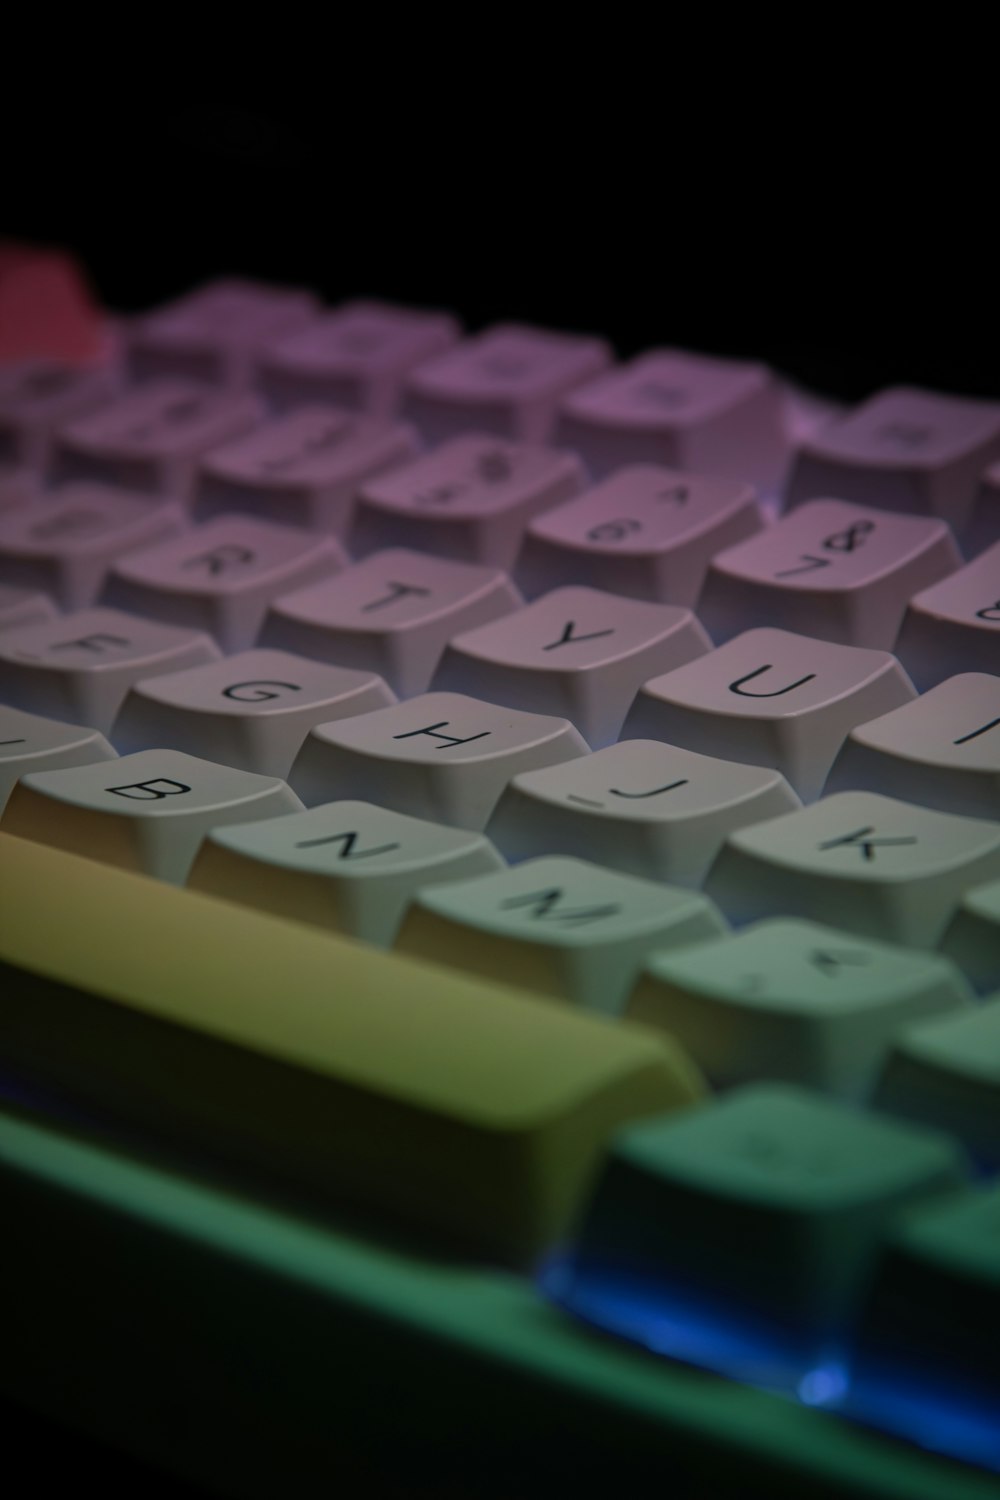 a close up of a computer keyboard with a multicolored key board